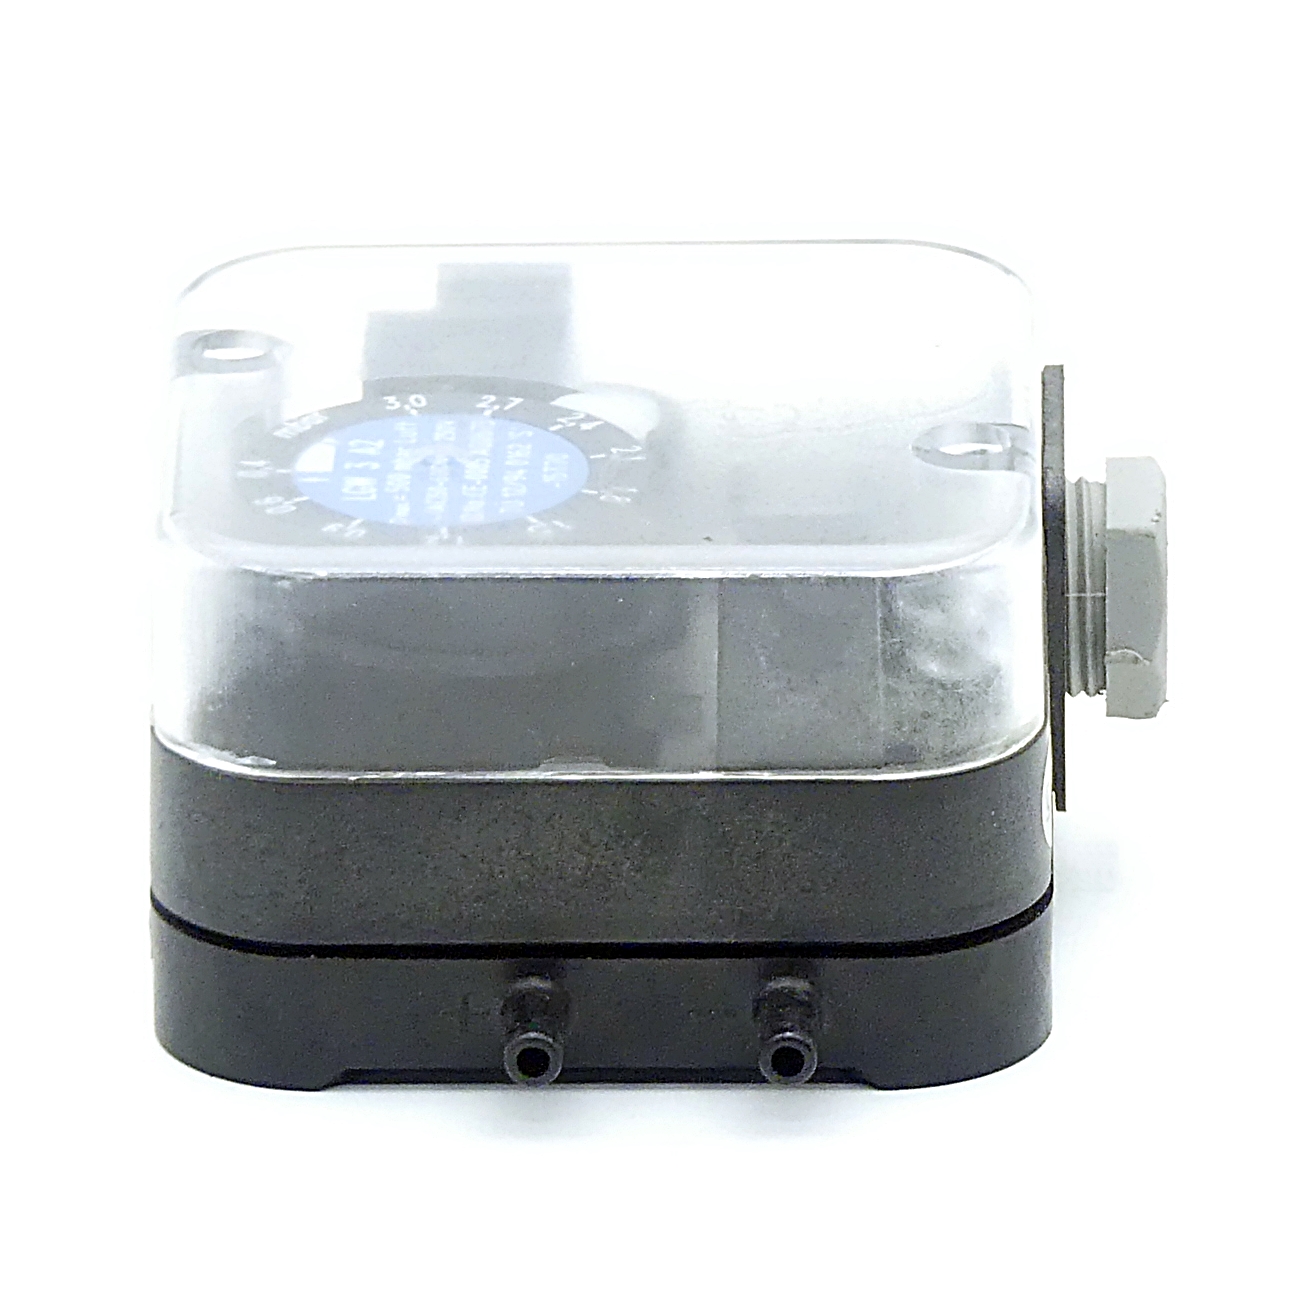 Differential pressure switch 